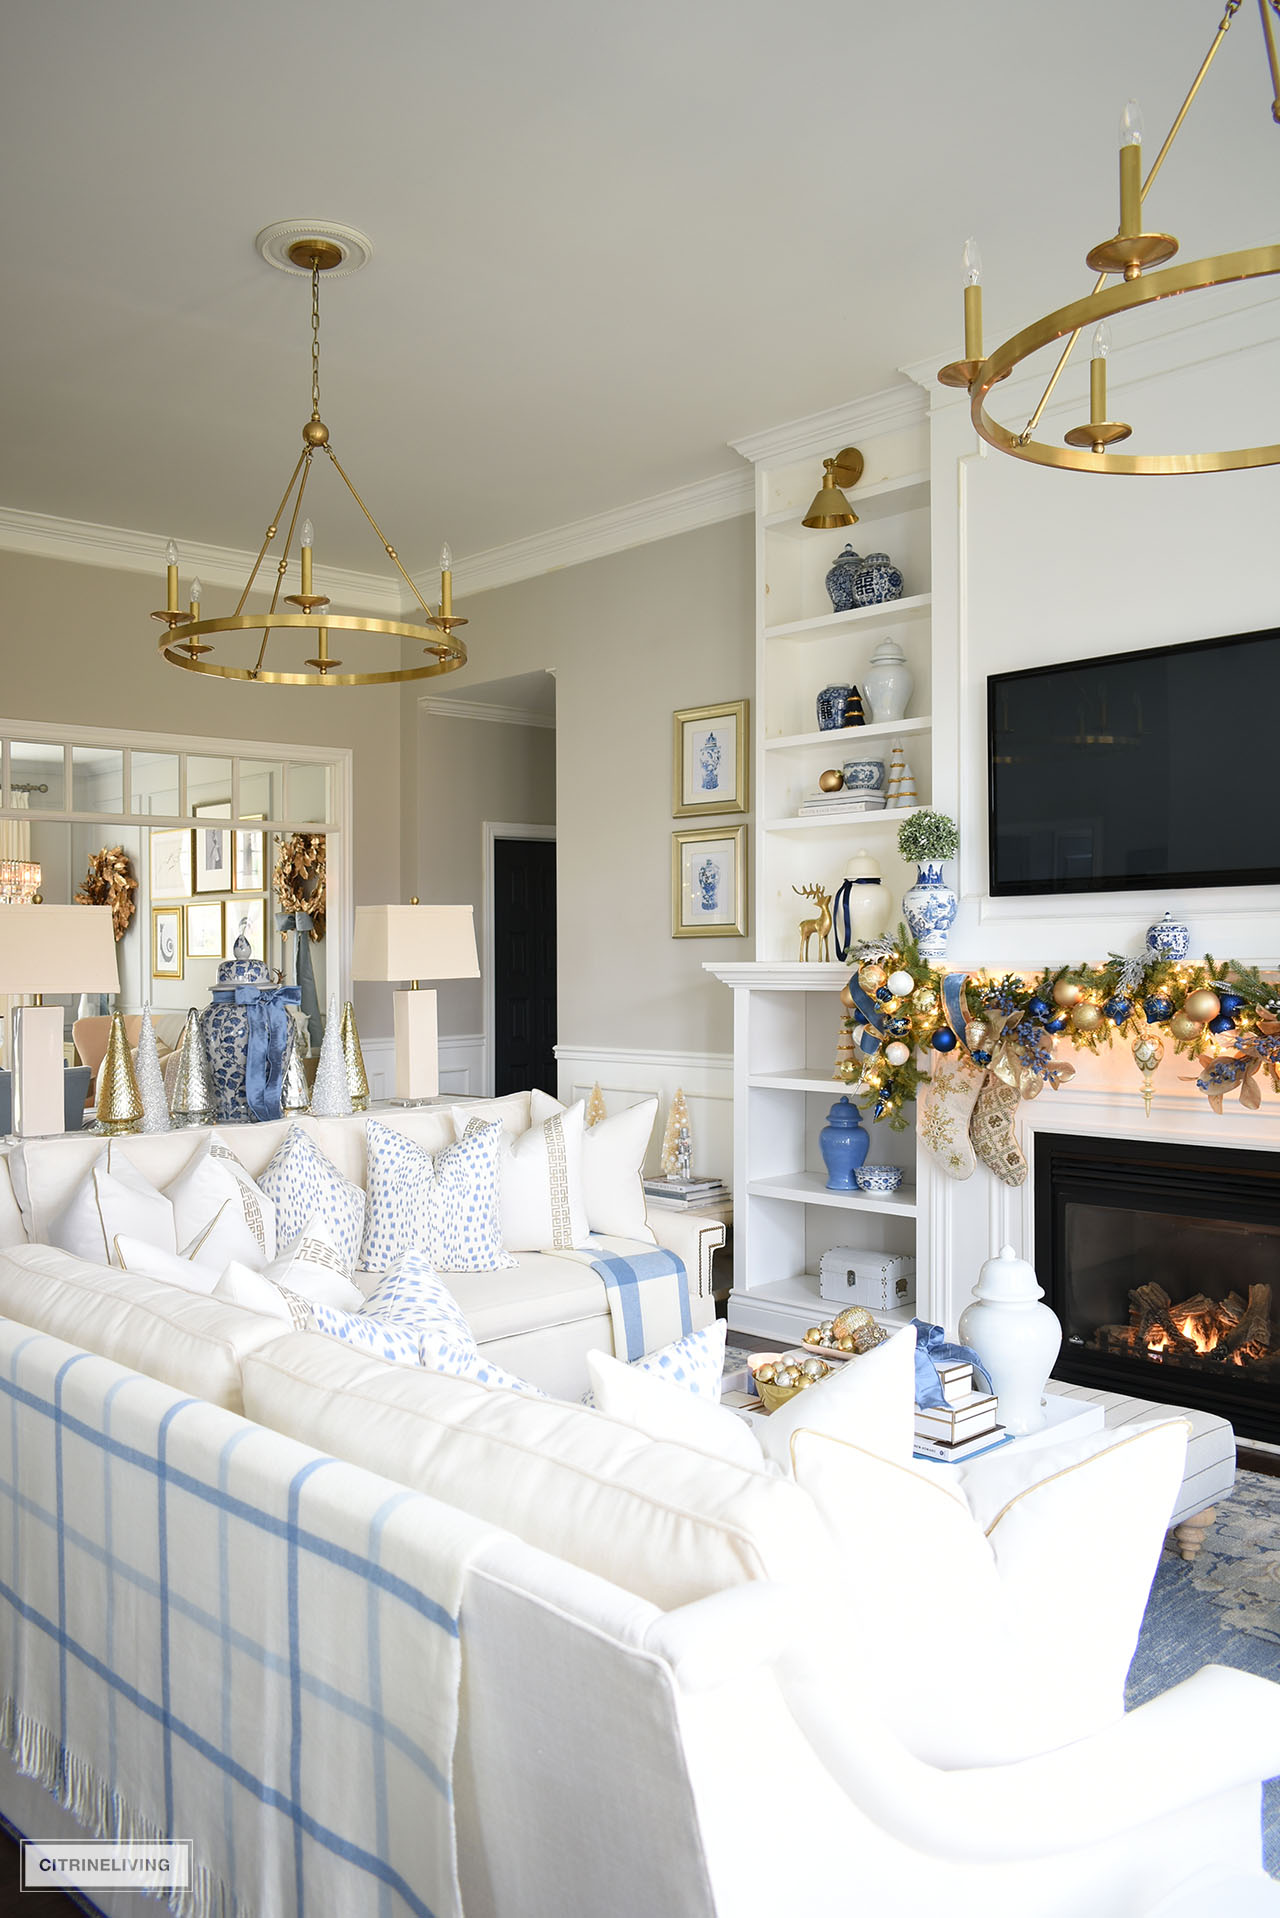 Living room with white sofas, decorated with chic white, gold and blue pillows for Chrsimtas. 